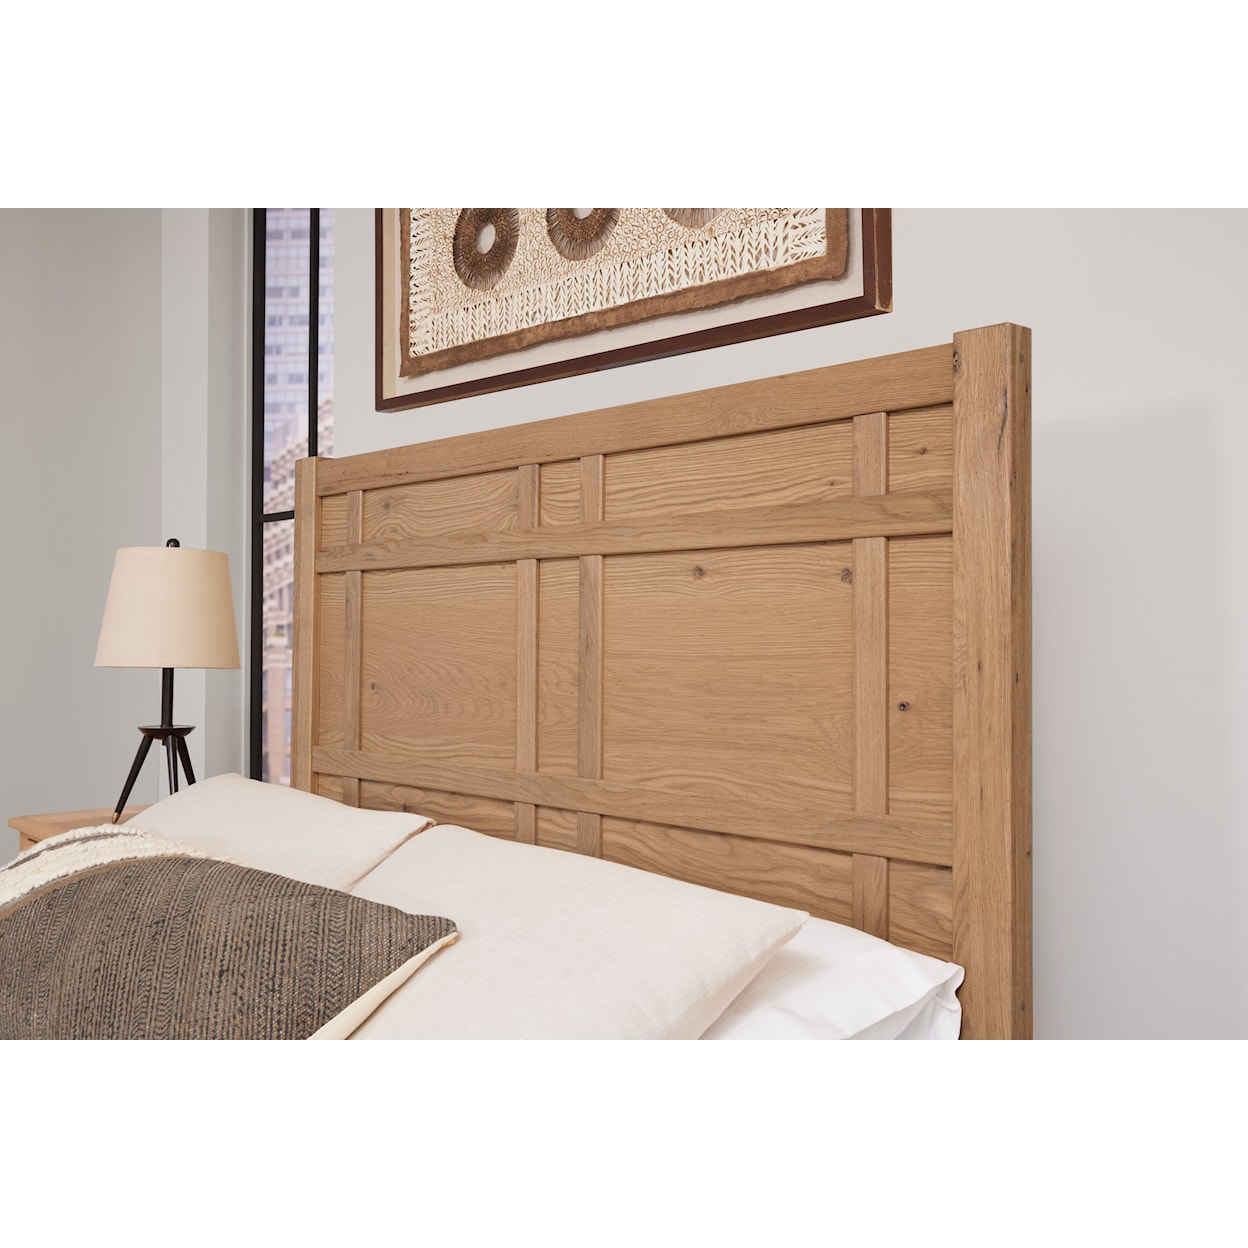 Artisan & Post Custom Express Queen Architectural Bed